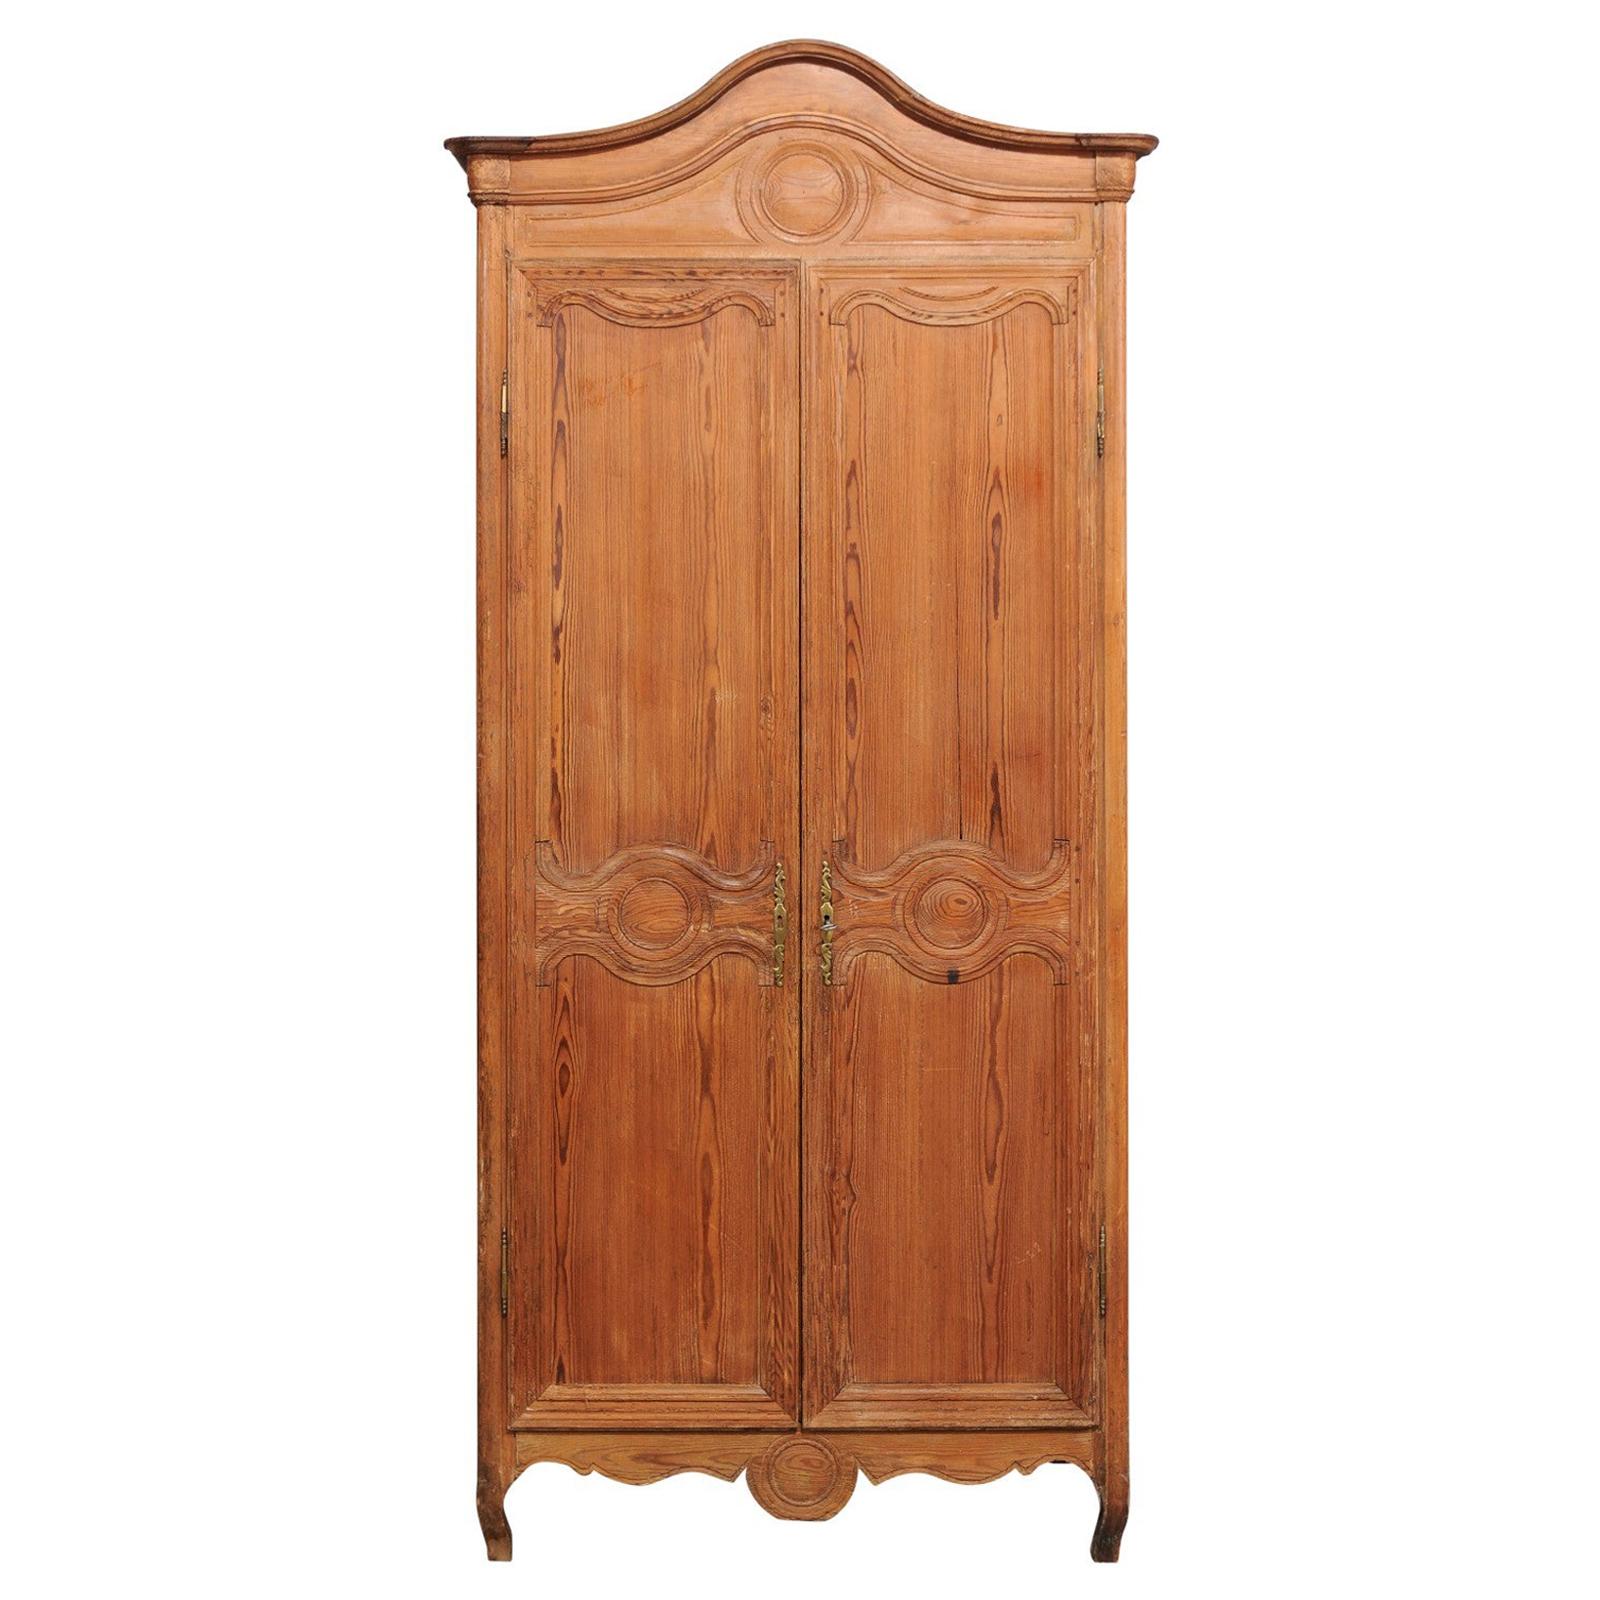 19th Century French Pine Armoire